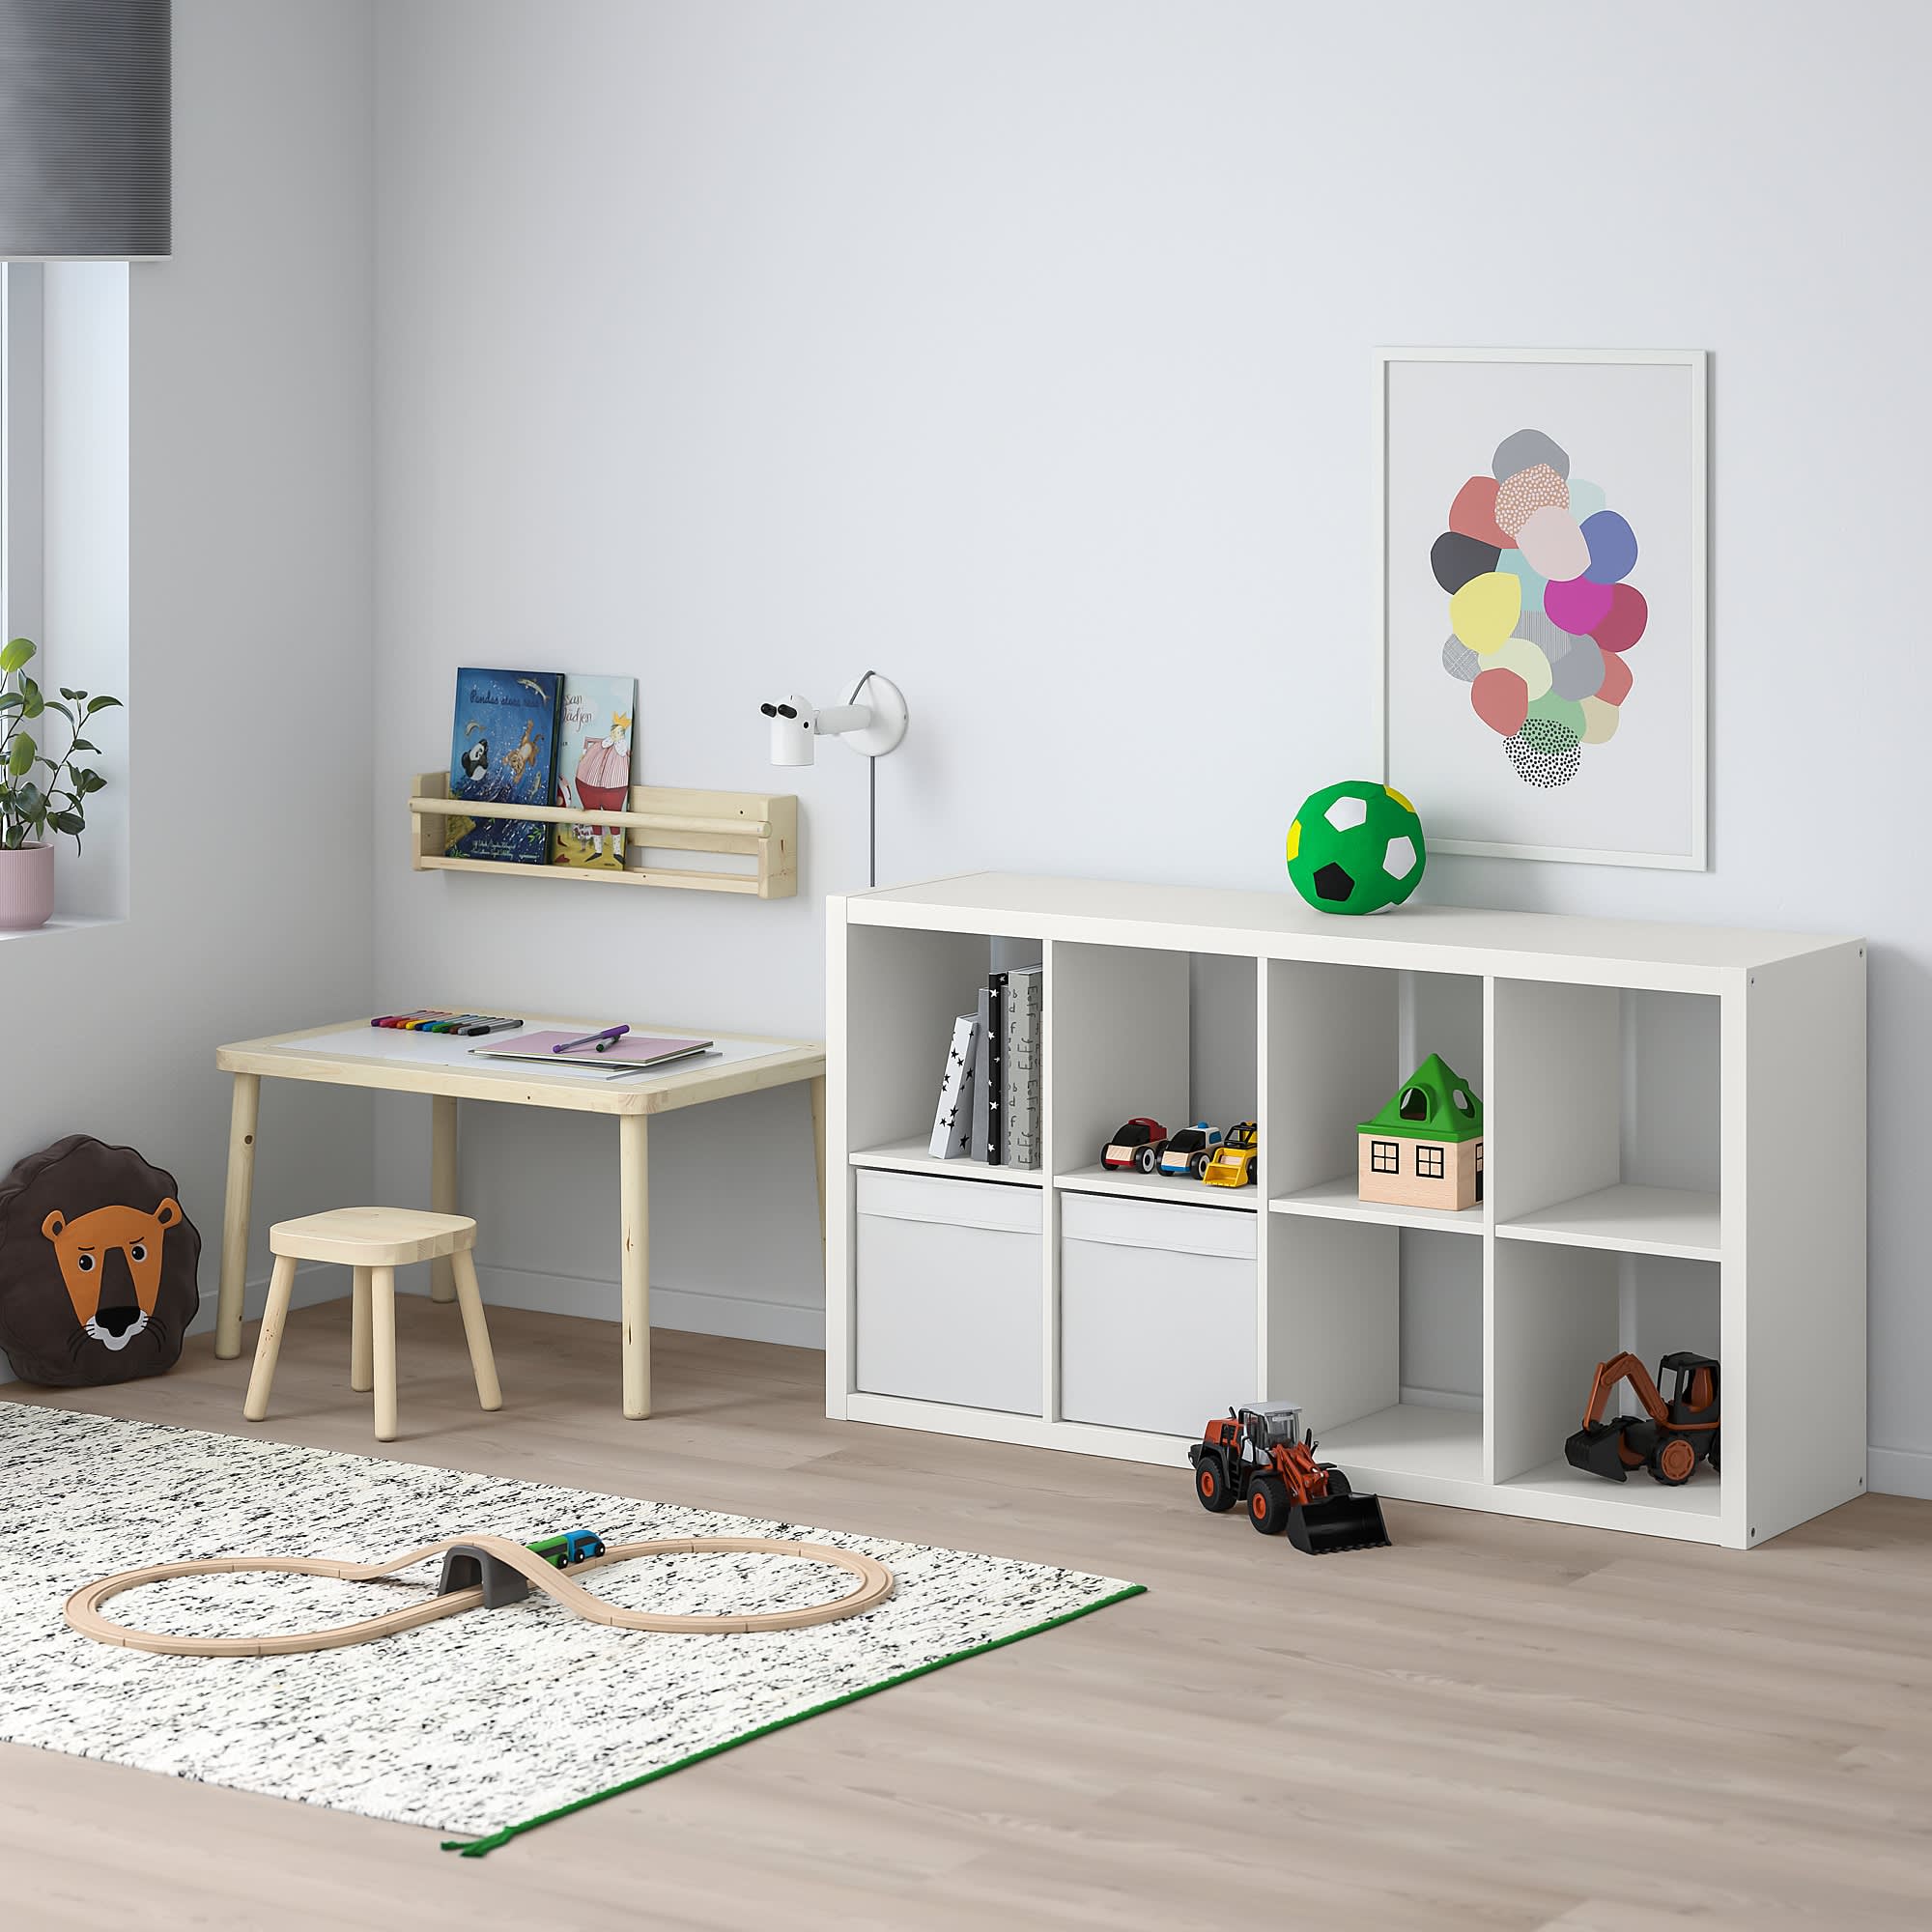 The IKEA Kallax Shelf Is the Best Way to Store Toys